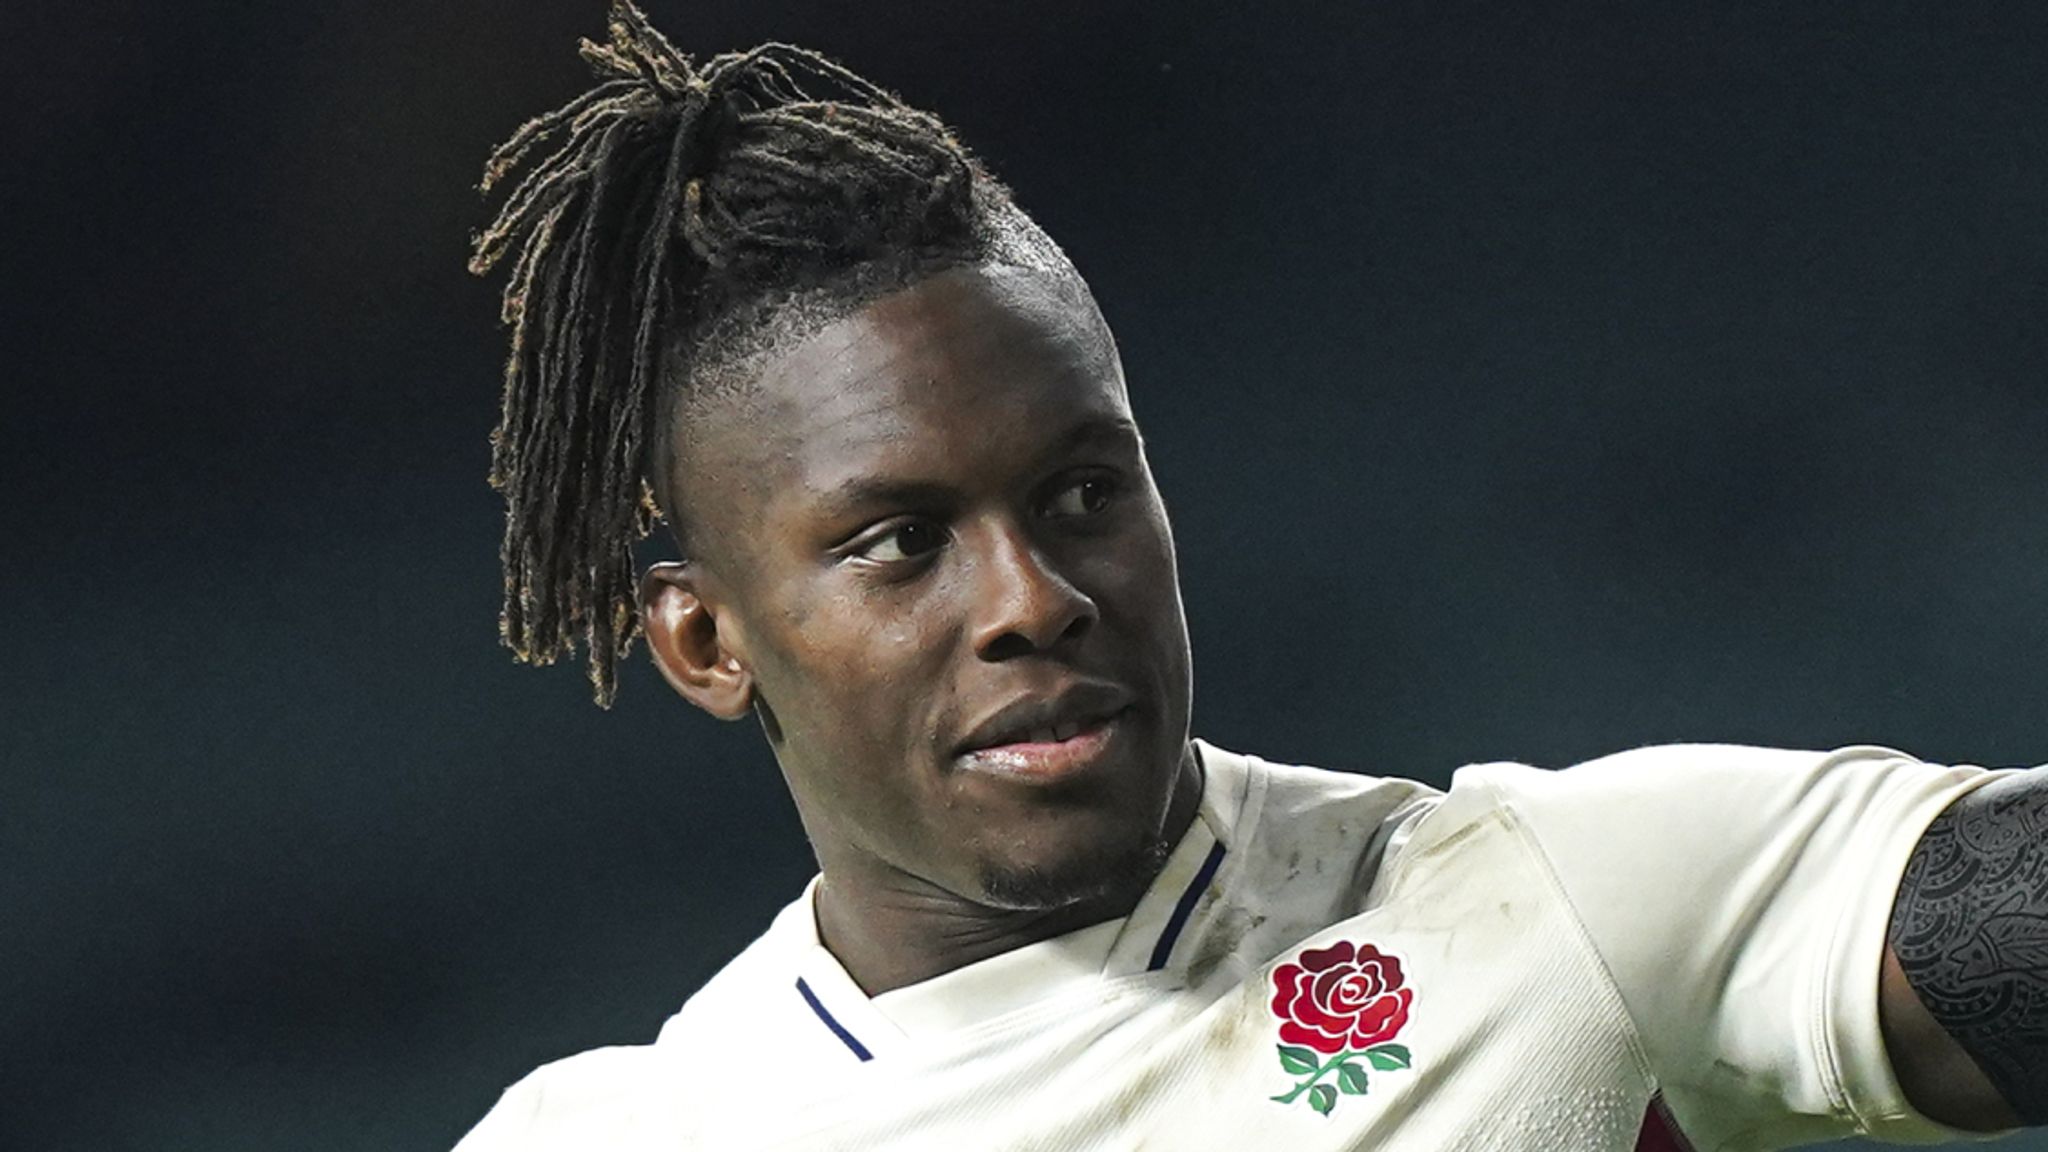 Maro Itoje and Joel Chessum Have a Clear Message for Steve Borthwick When it Comes to Player Selection